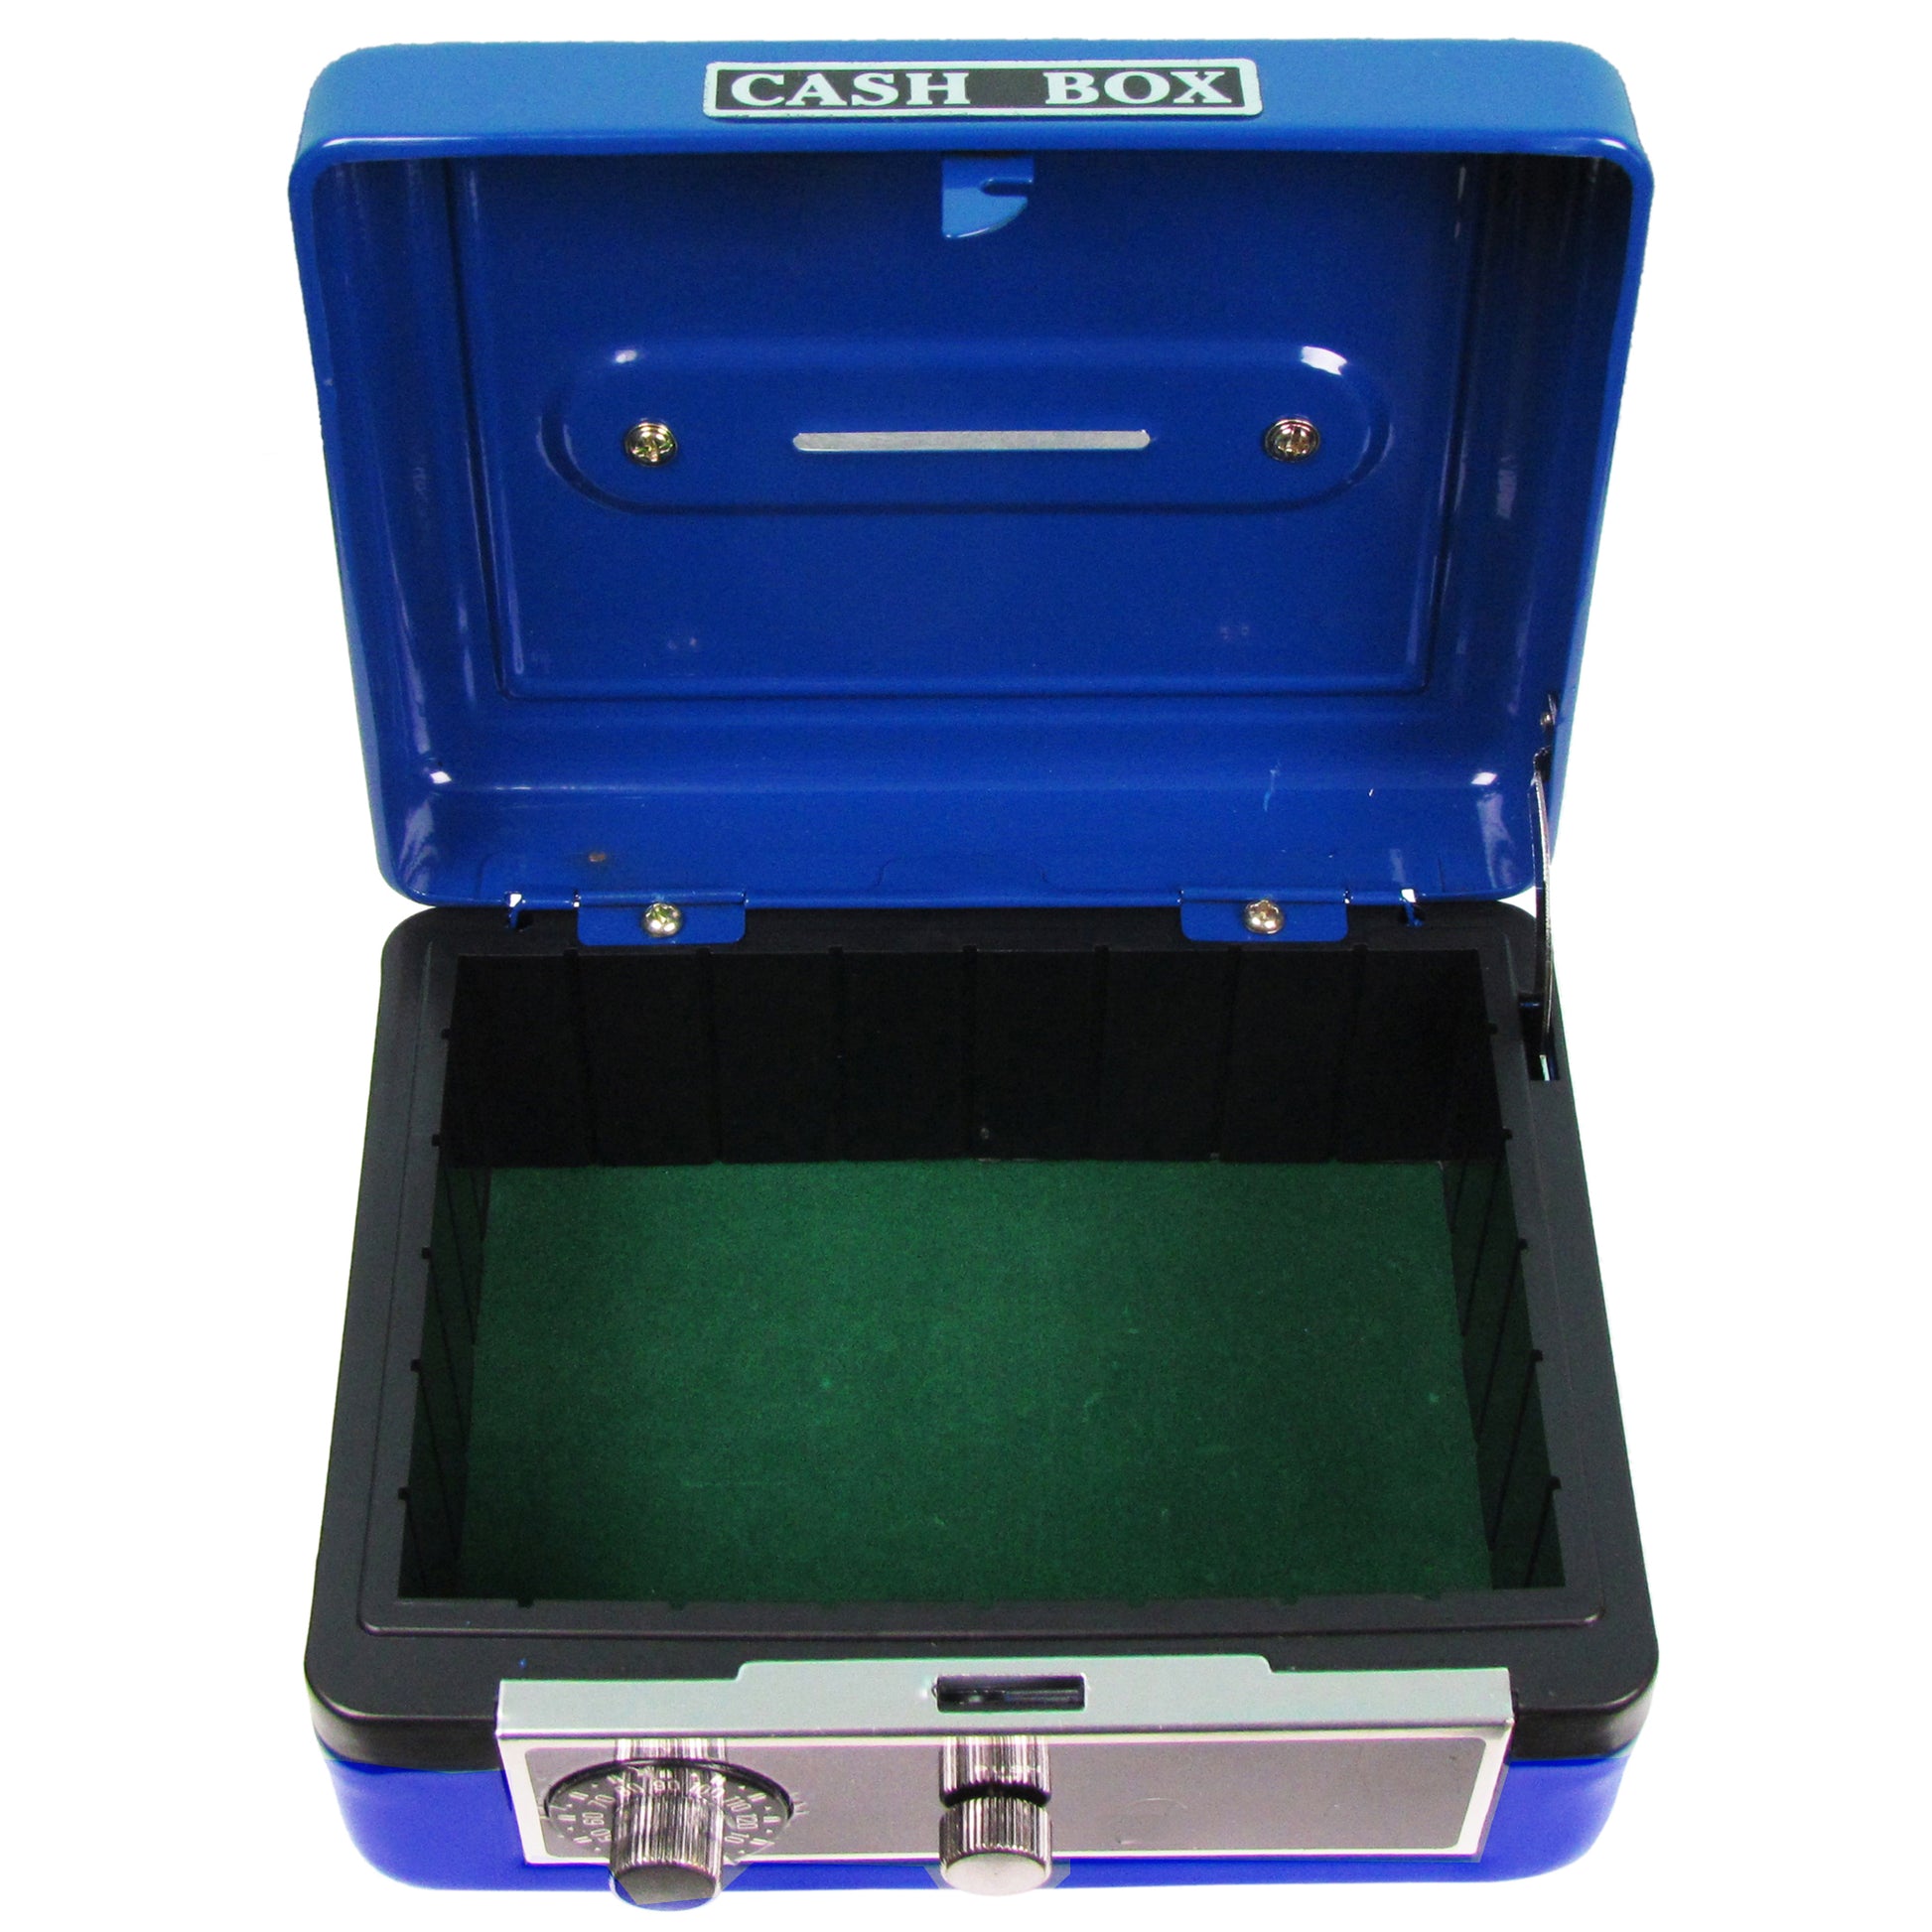 Personalized Blue Cash Box with Rocket design